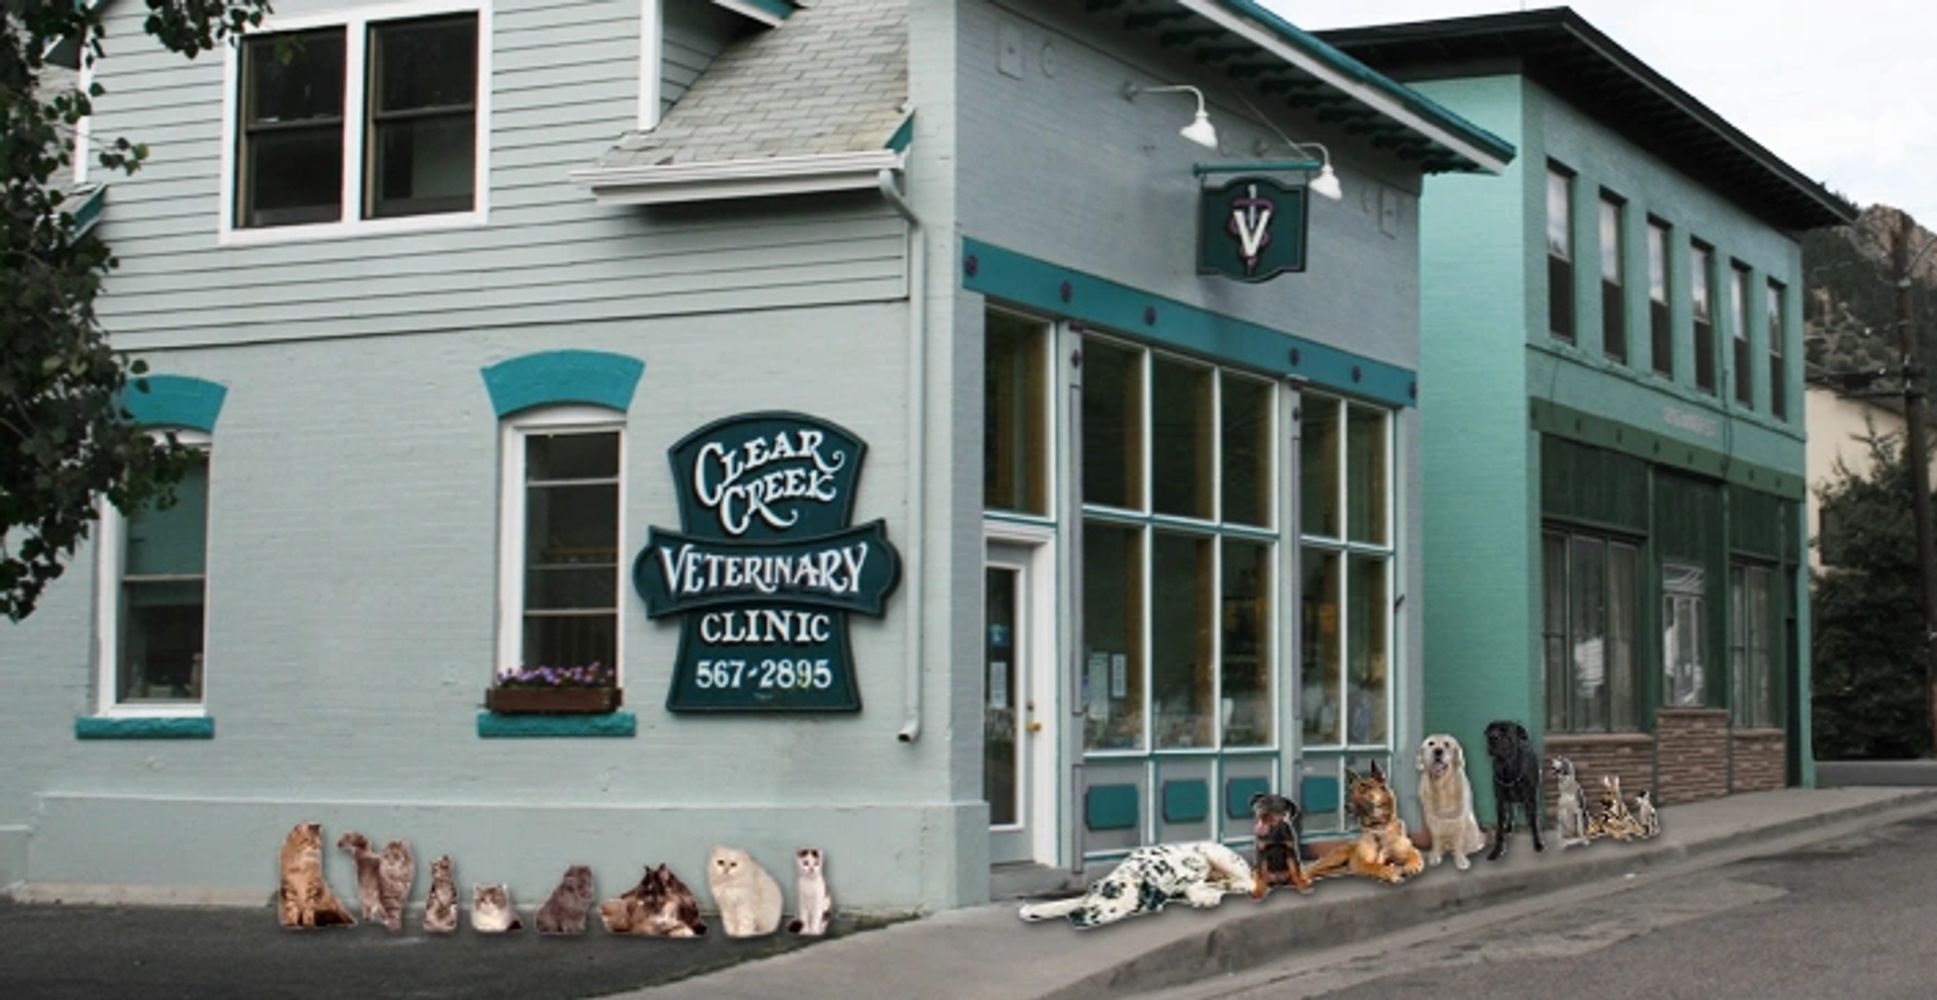 Photo of pets lined up outside Clear Creek Veterinary Clinic in Idaho Springs Colorado